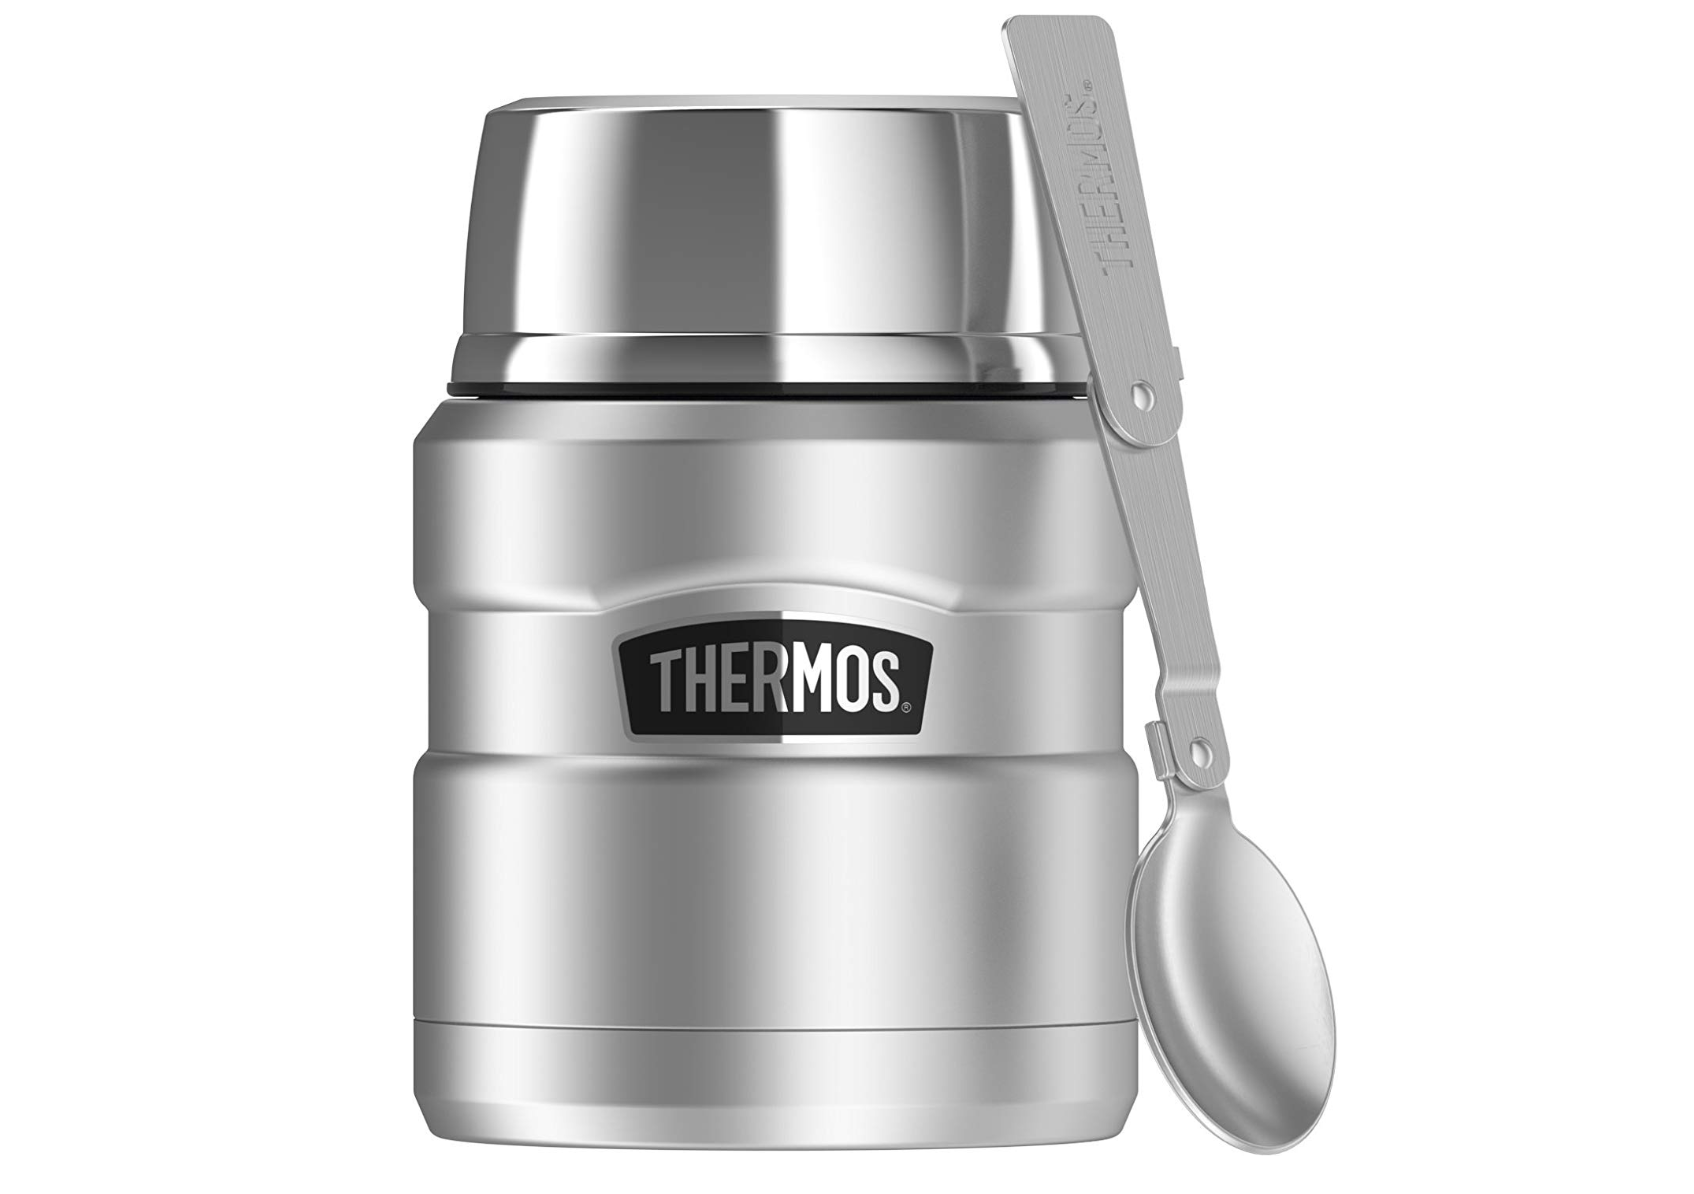 thermos for bringing hot food on the go